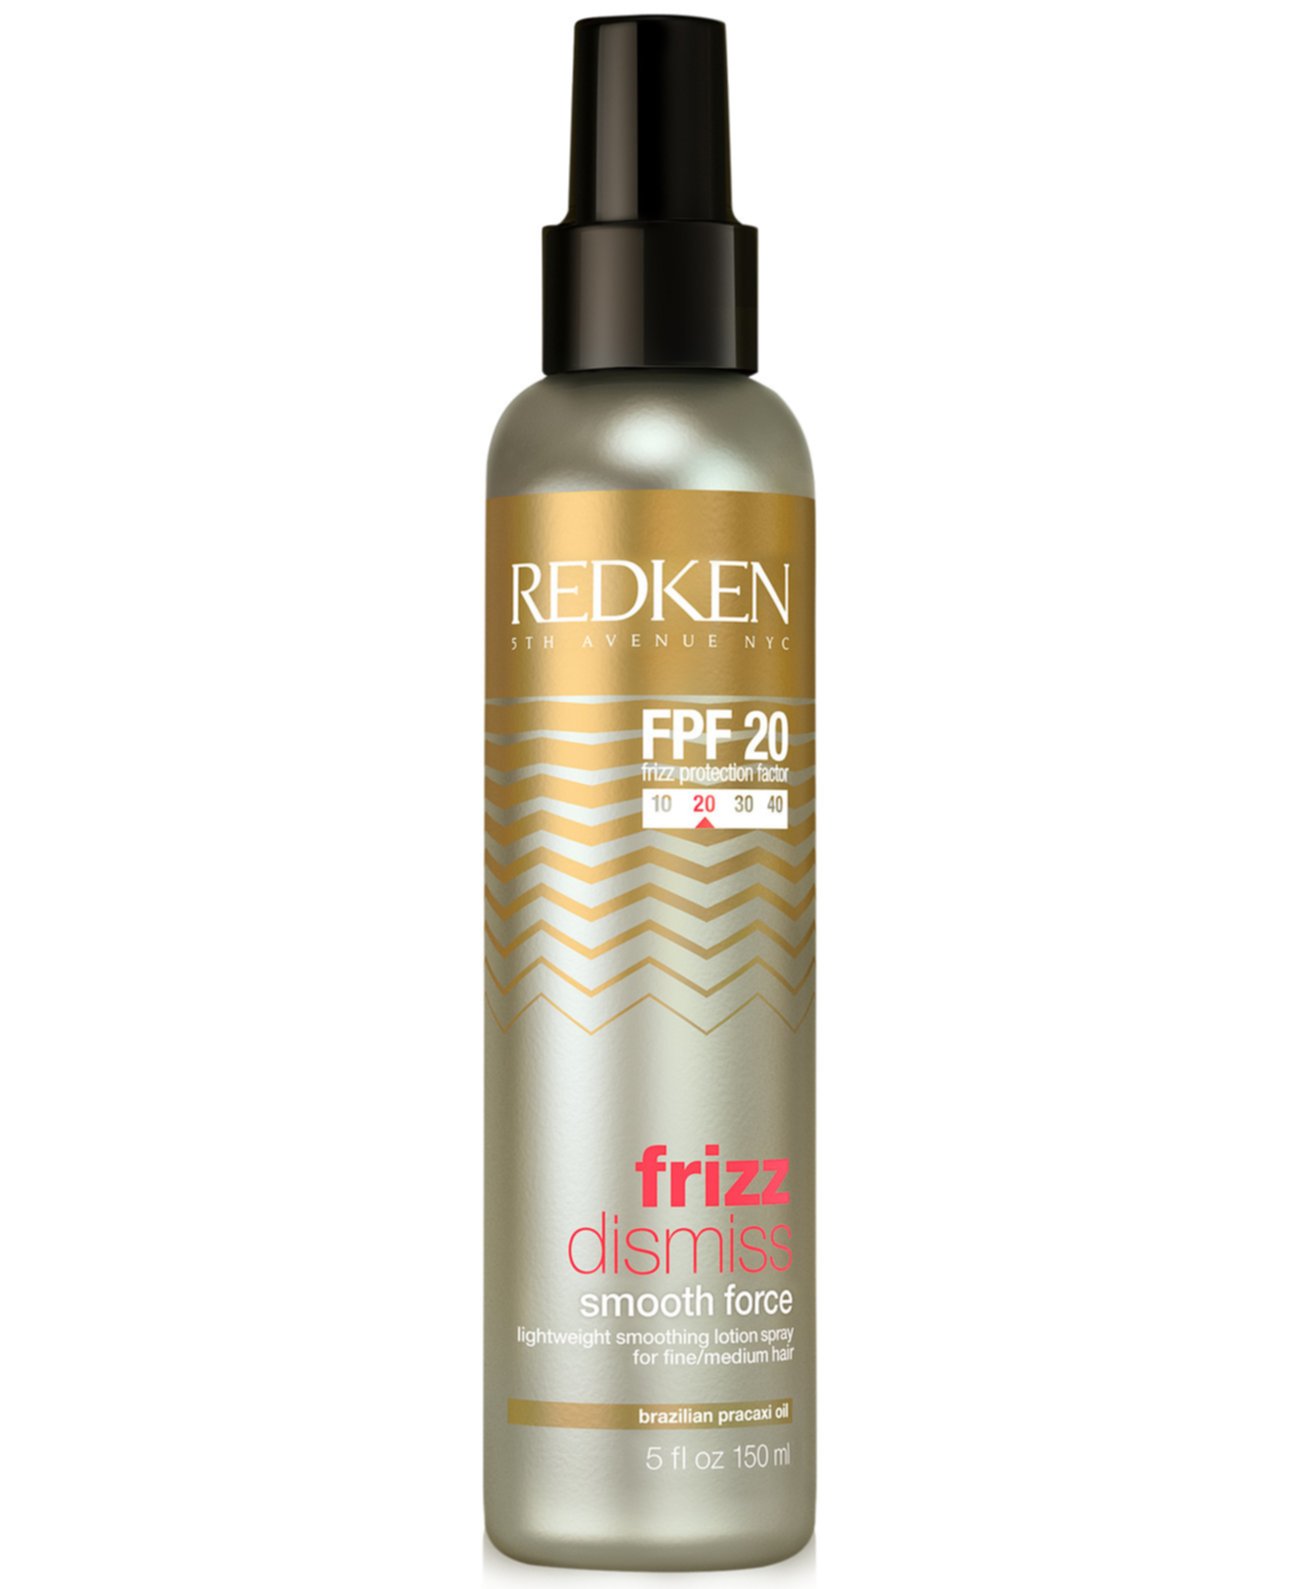 Frizz Dismiss Smooth Force, 150 мл, от PUREBEAUTY Салон & Спа Redken